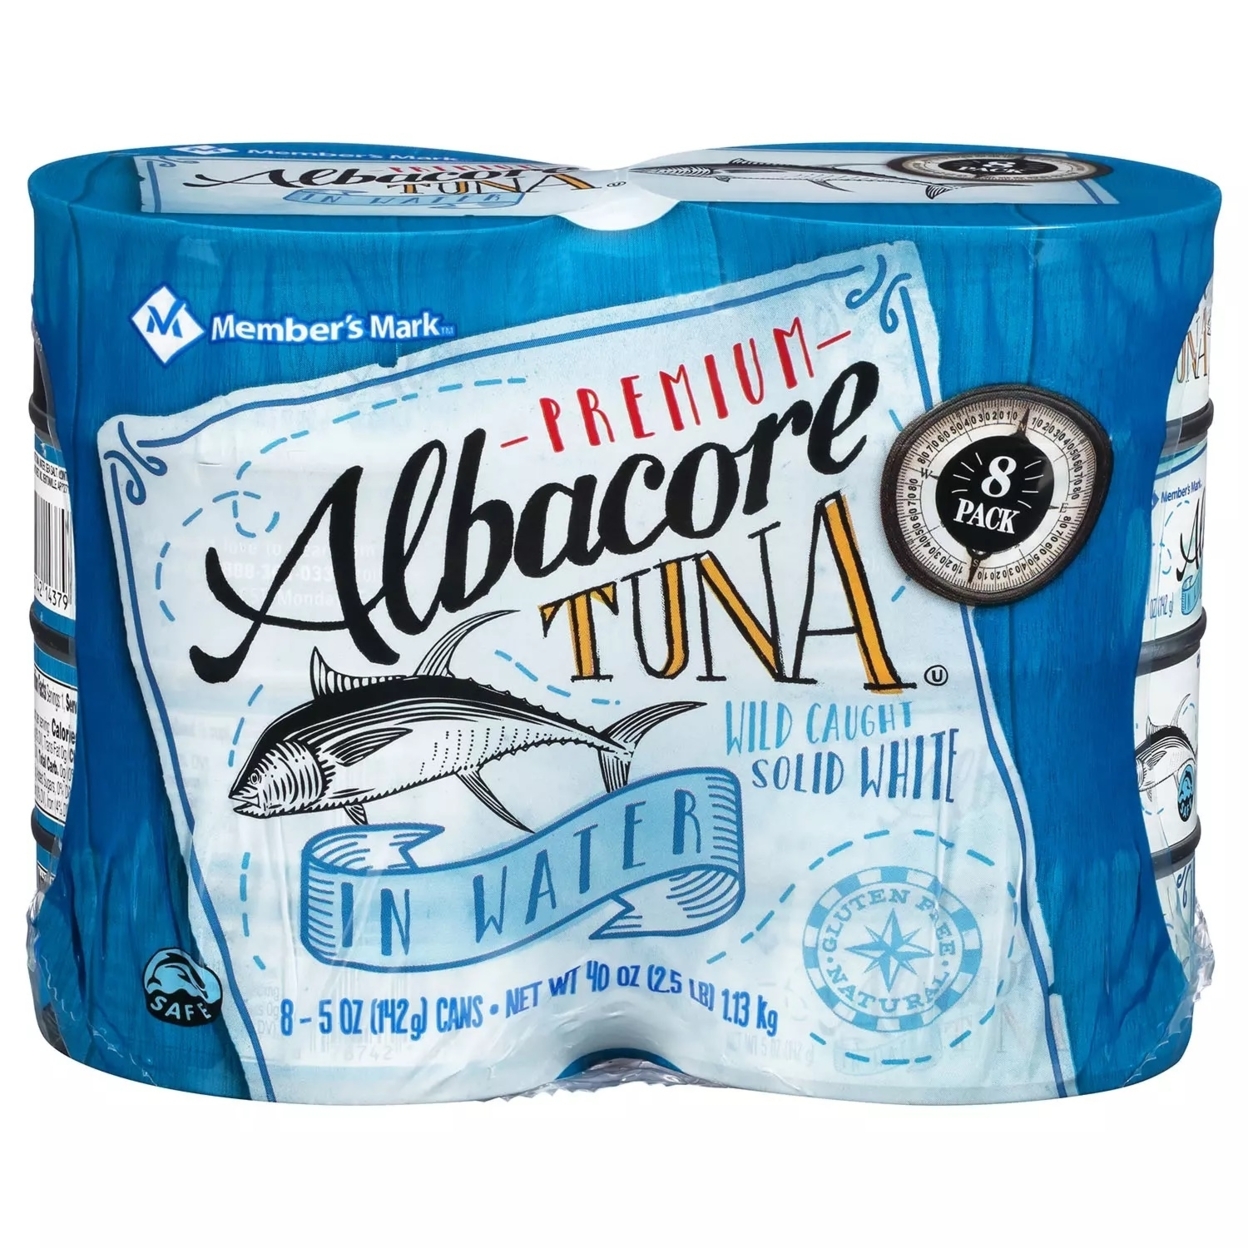 Member's Mark Solid White Albacore Tuna, 5 Ounce (Pack Of 8)